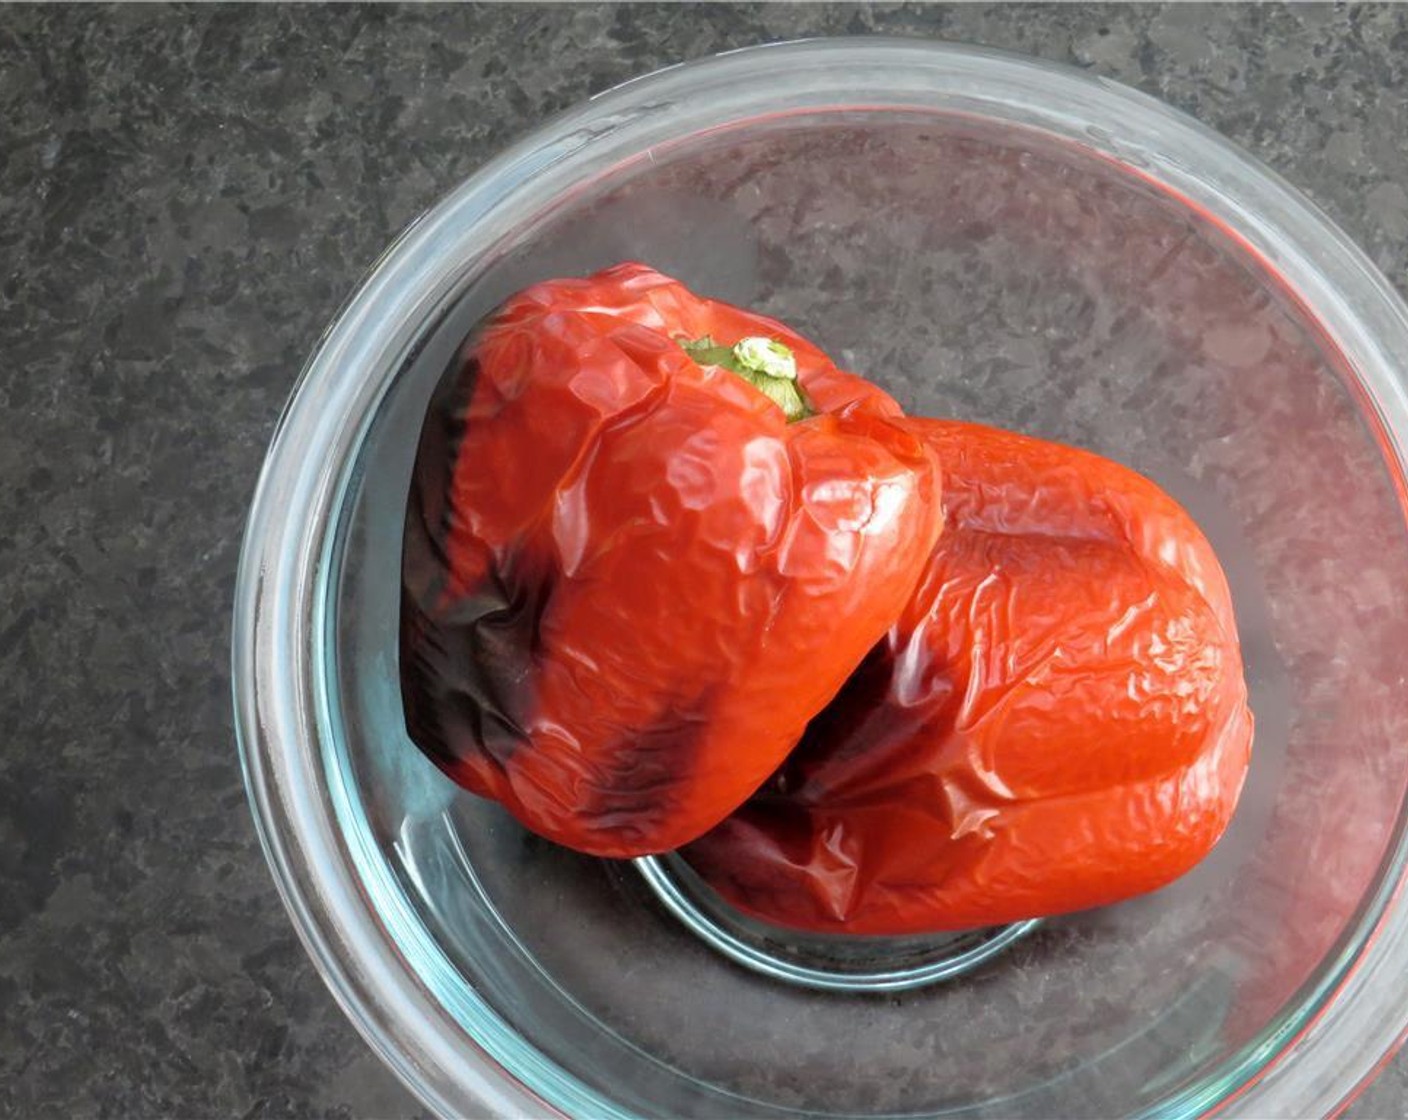 step 2 Place Red Bell Peppers (2) on a baking sheet, and roast for 30 minutes, until flesh is softened and skin is blackened. Remove red bell peppers from the oven, and place them in a small glass bowl. Cover the bowl with cellophane.